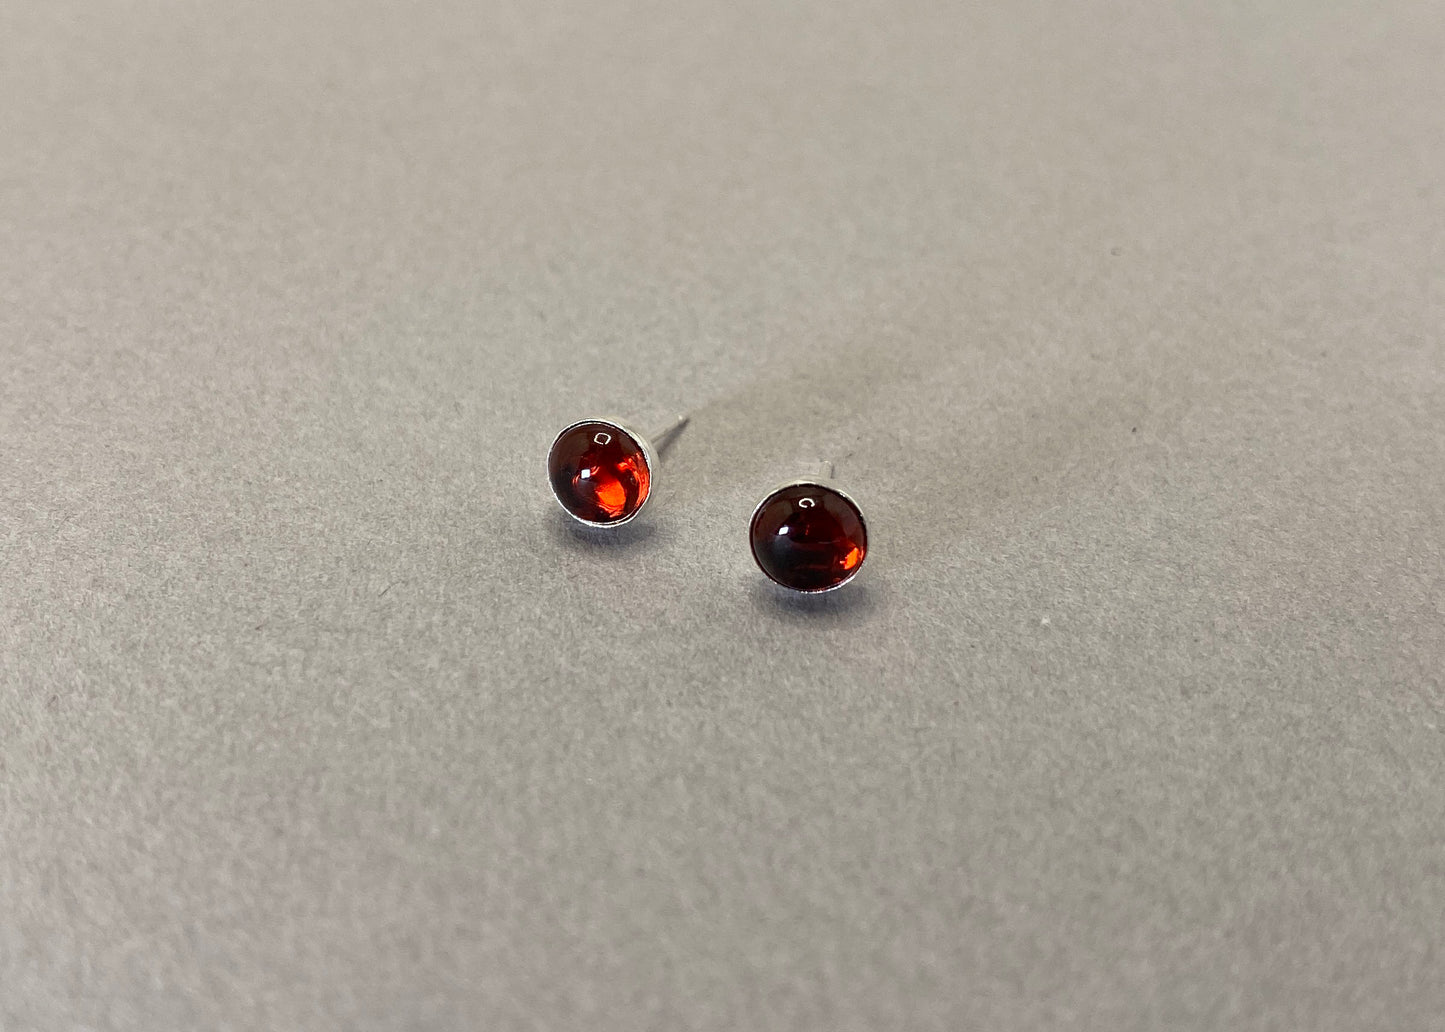 Garnet is the January birthstone, and has traditionally symbolized sentiments like love, friendship, and commitment. 